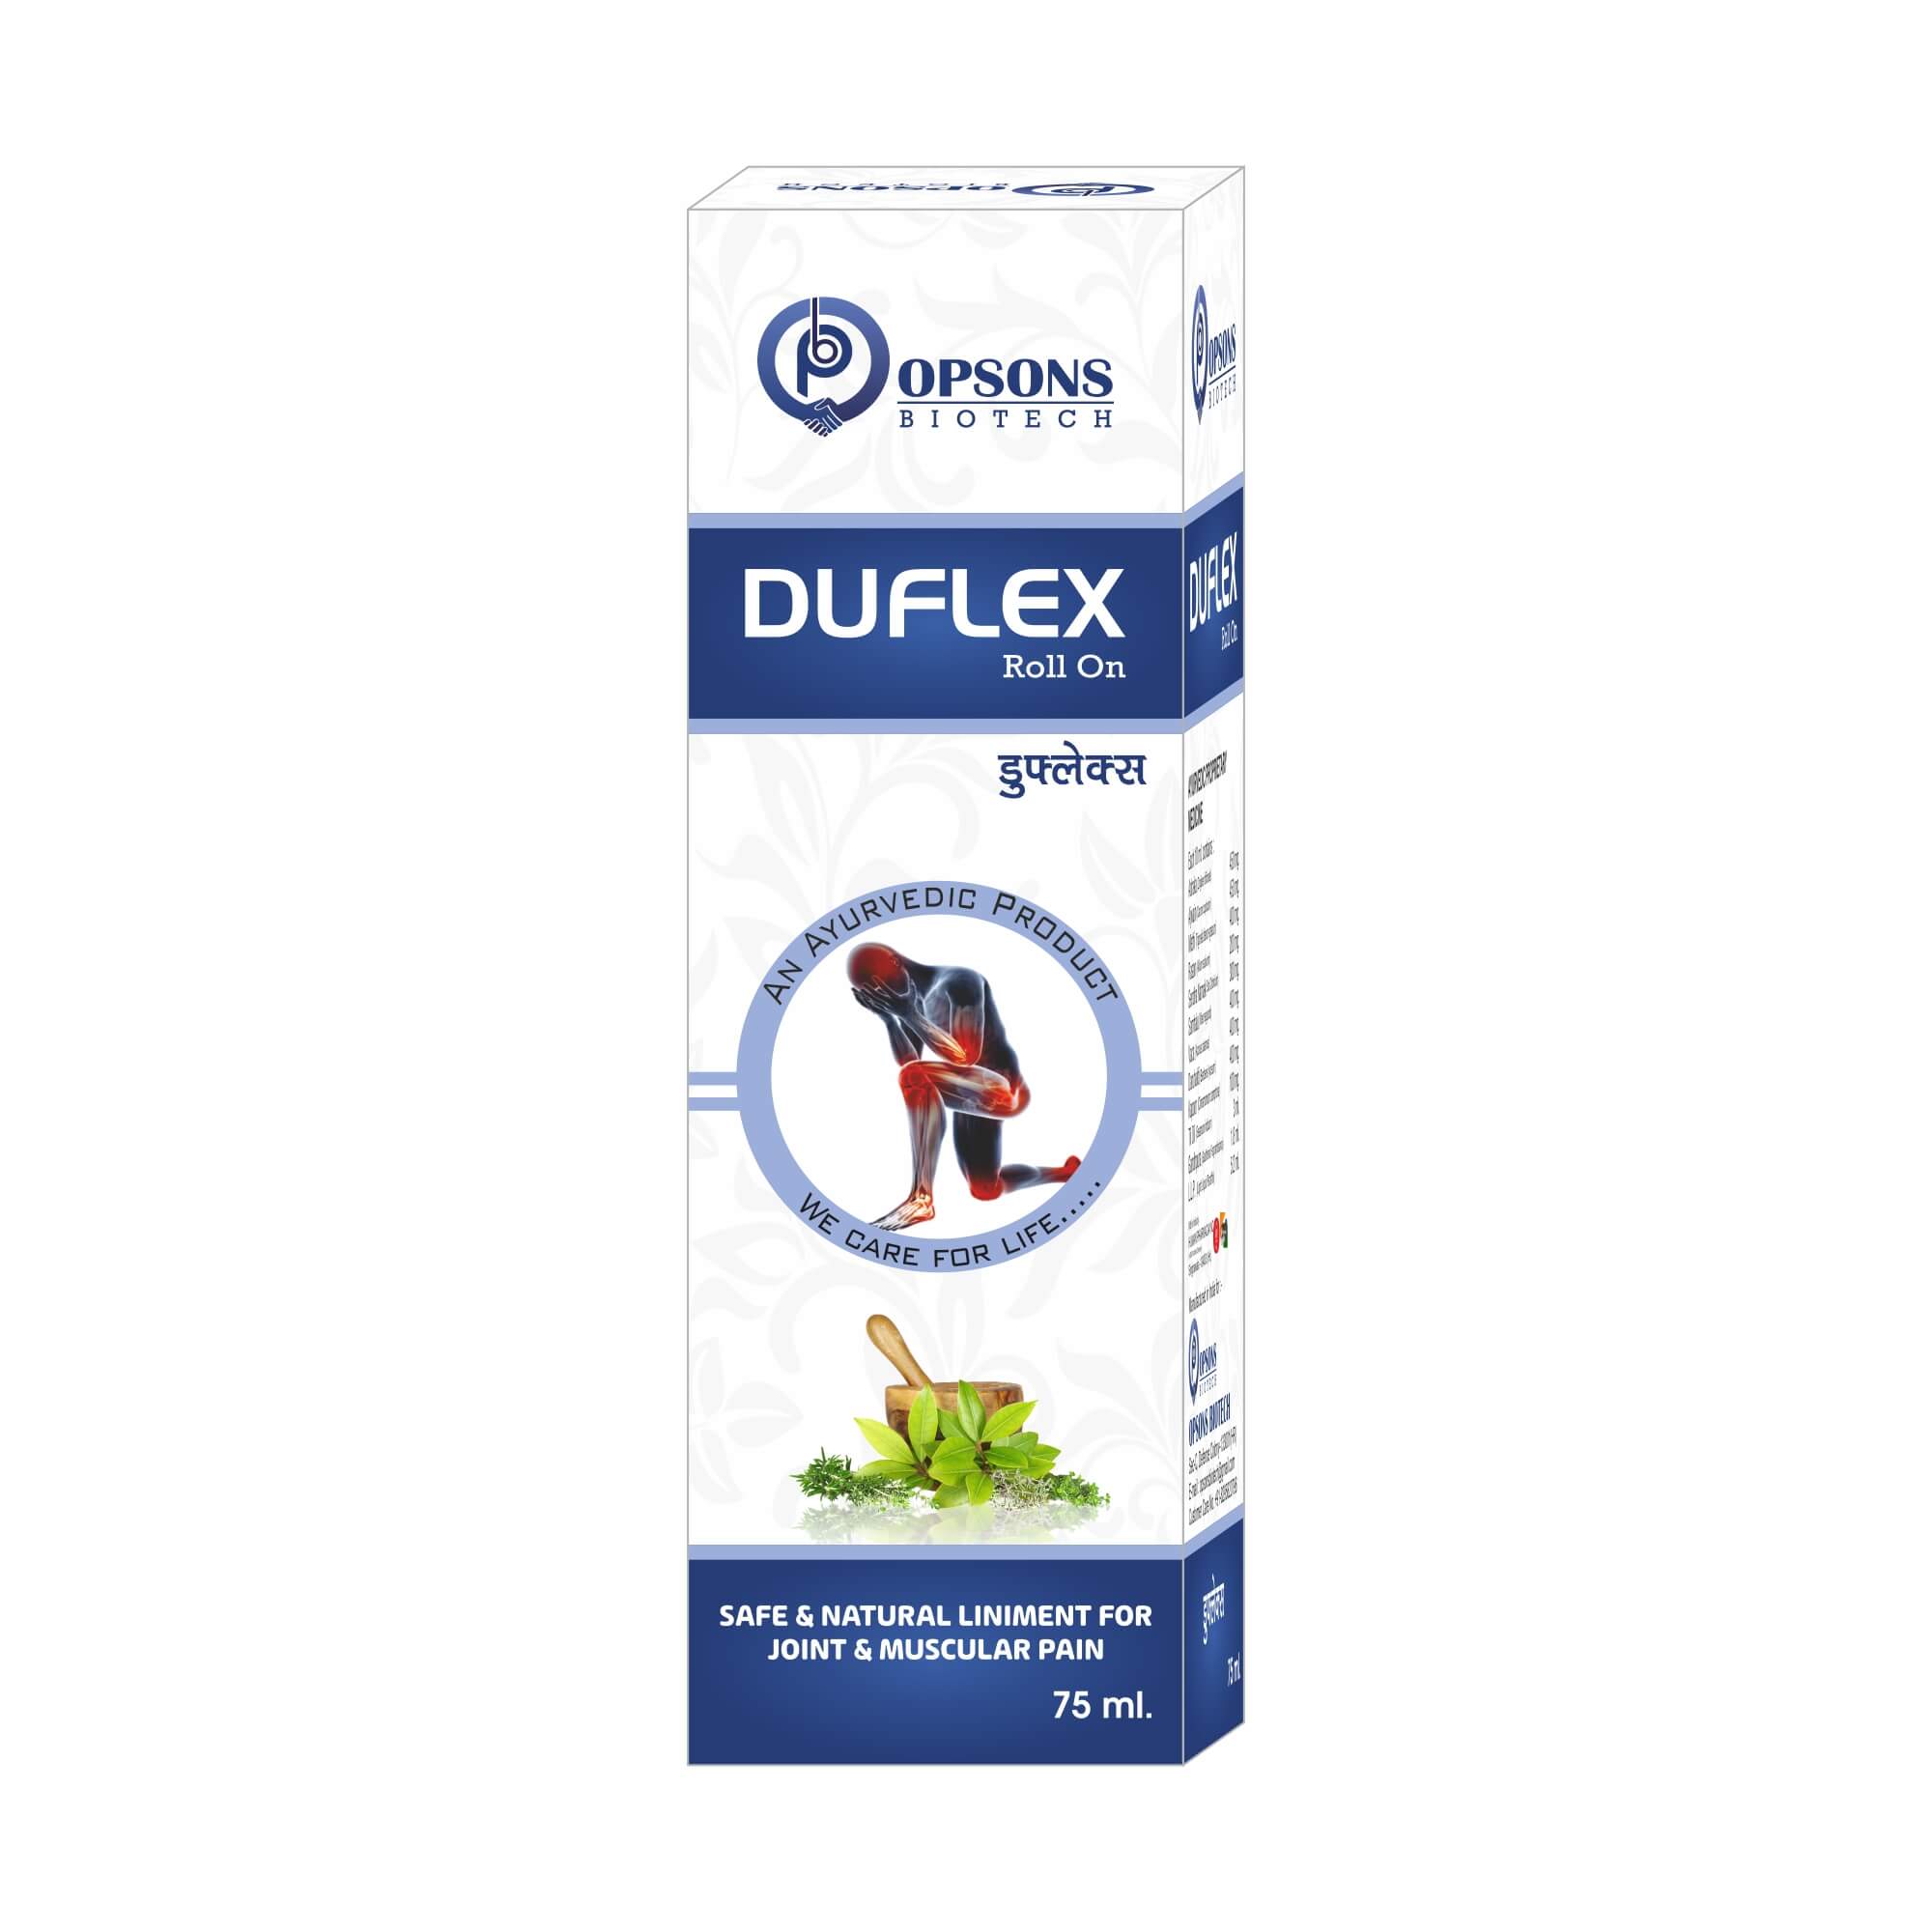 Product Name: Duflex Roll, Compositions of Duflex Roll are Safe & Natural Liniment For Joint & Muscular Pain - Opsons Biotech